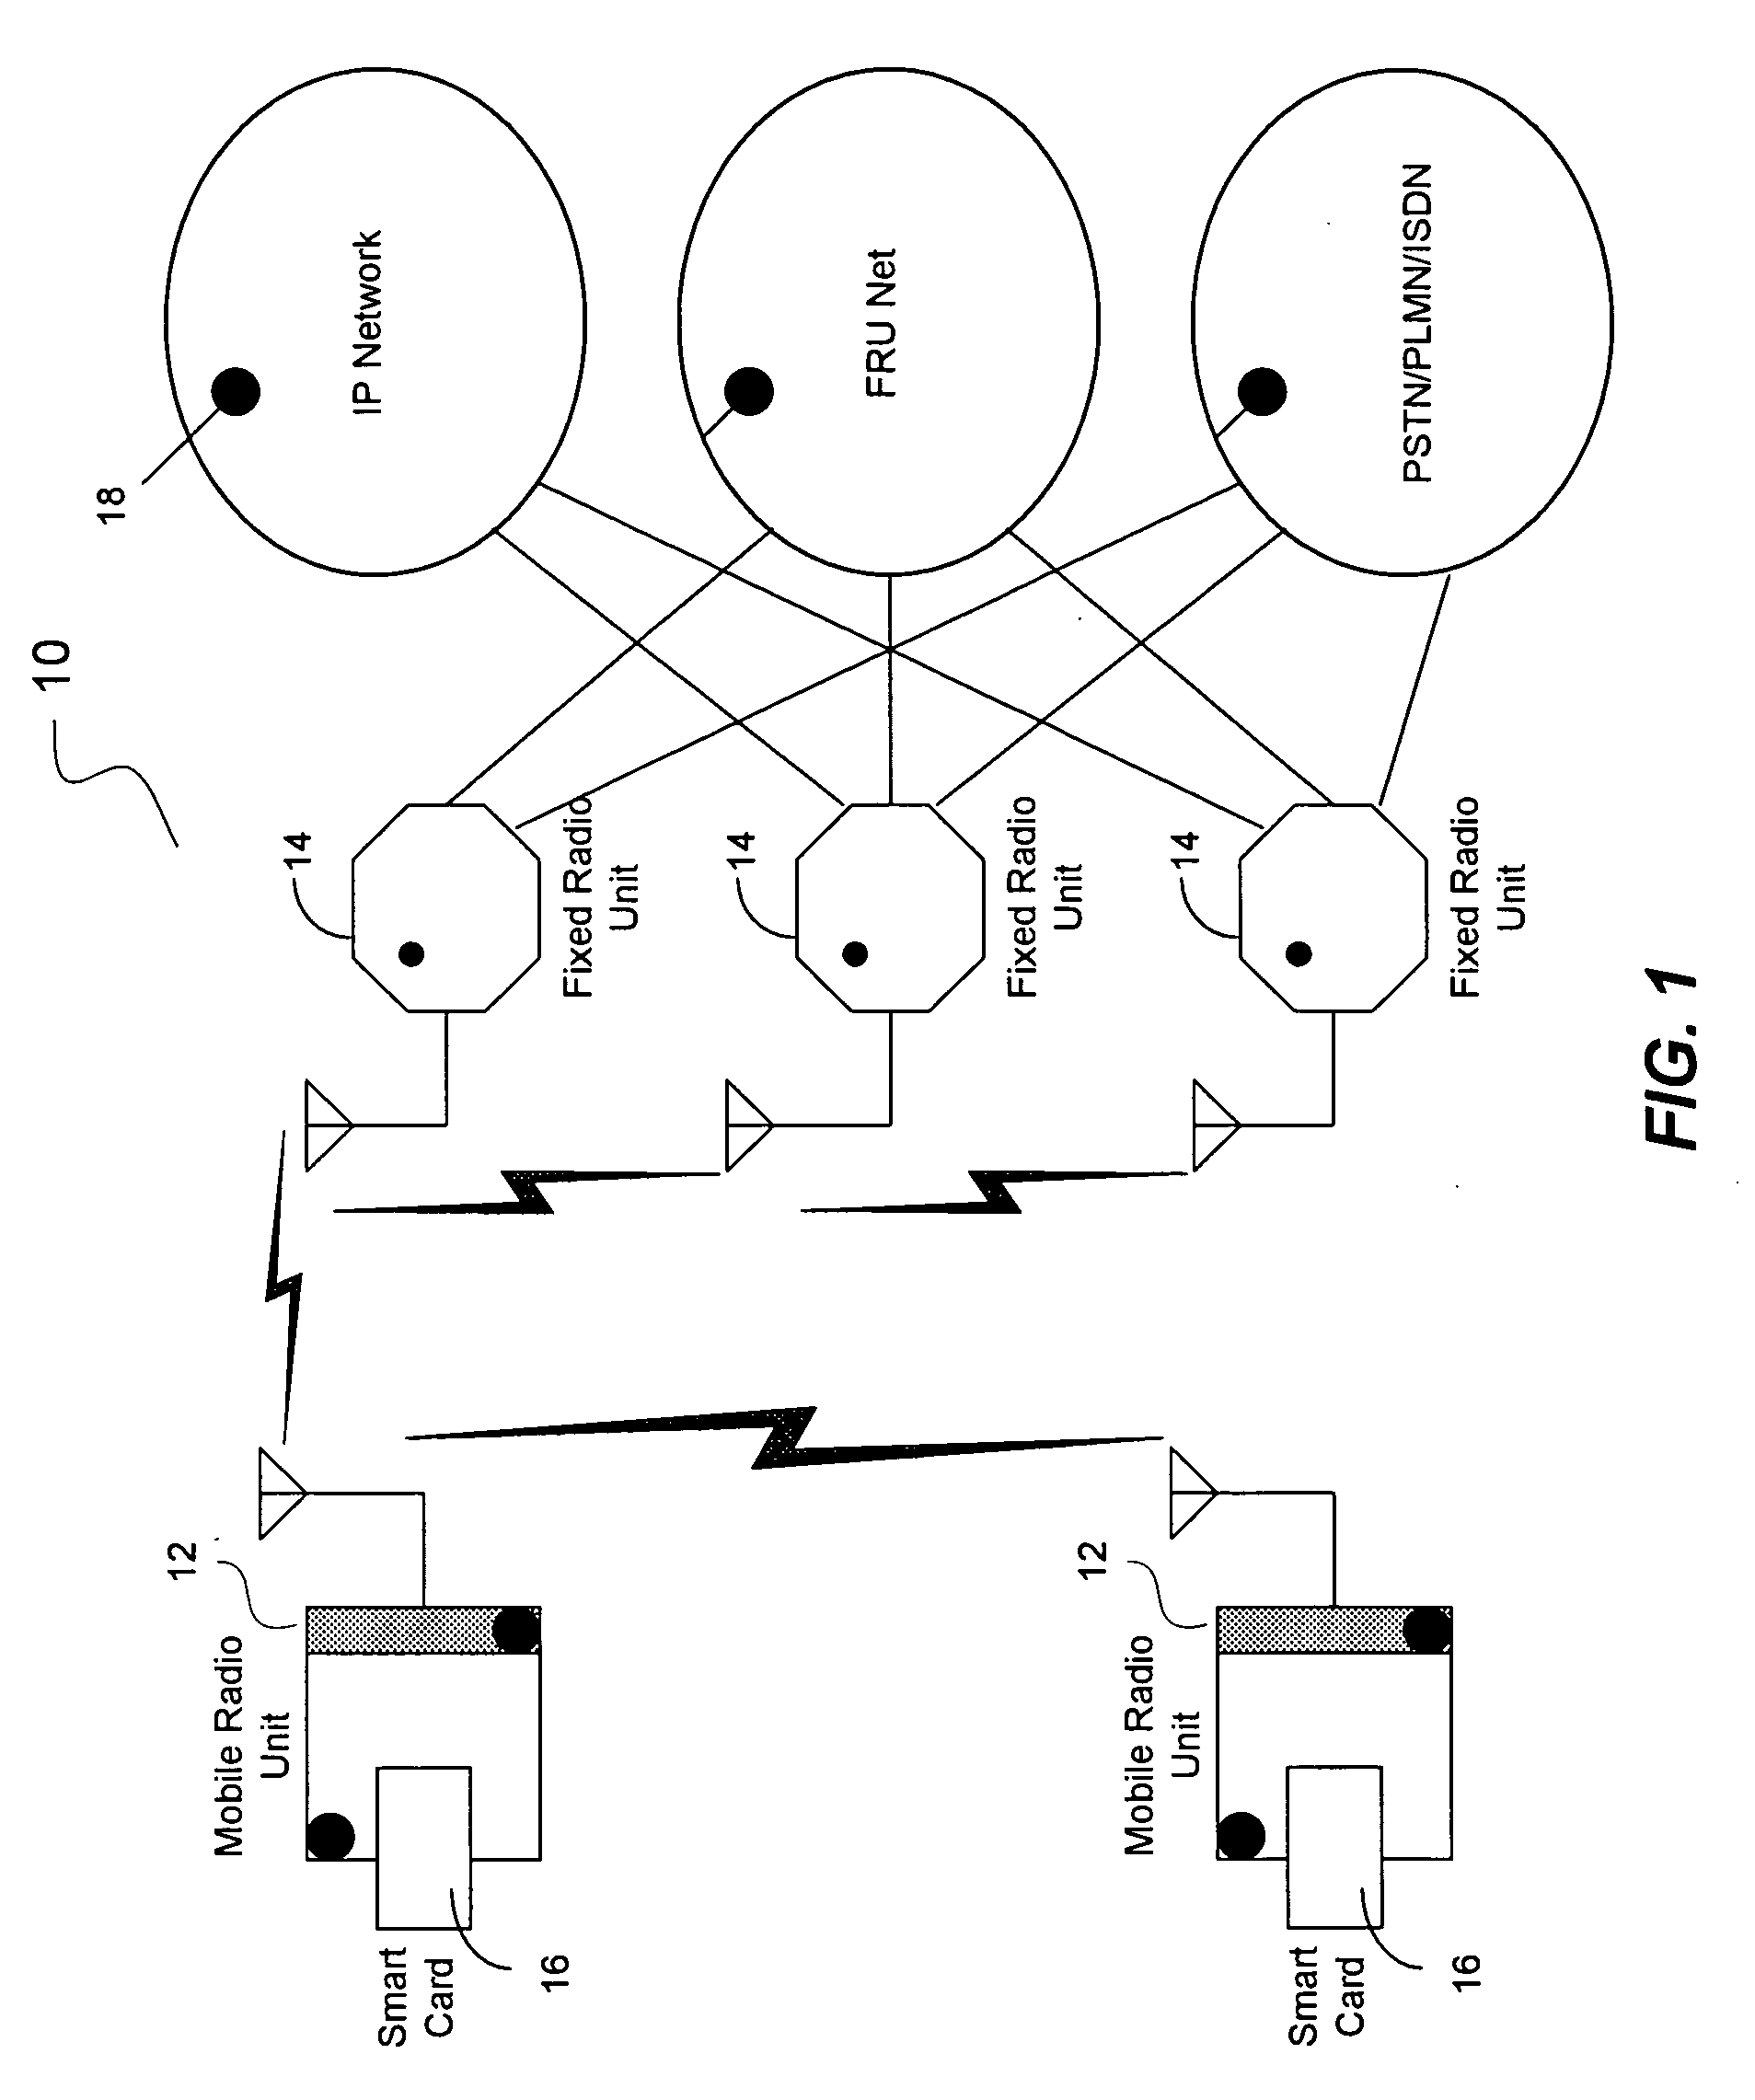 Method and system for determining direction of transmission using multi-facet antenna